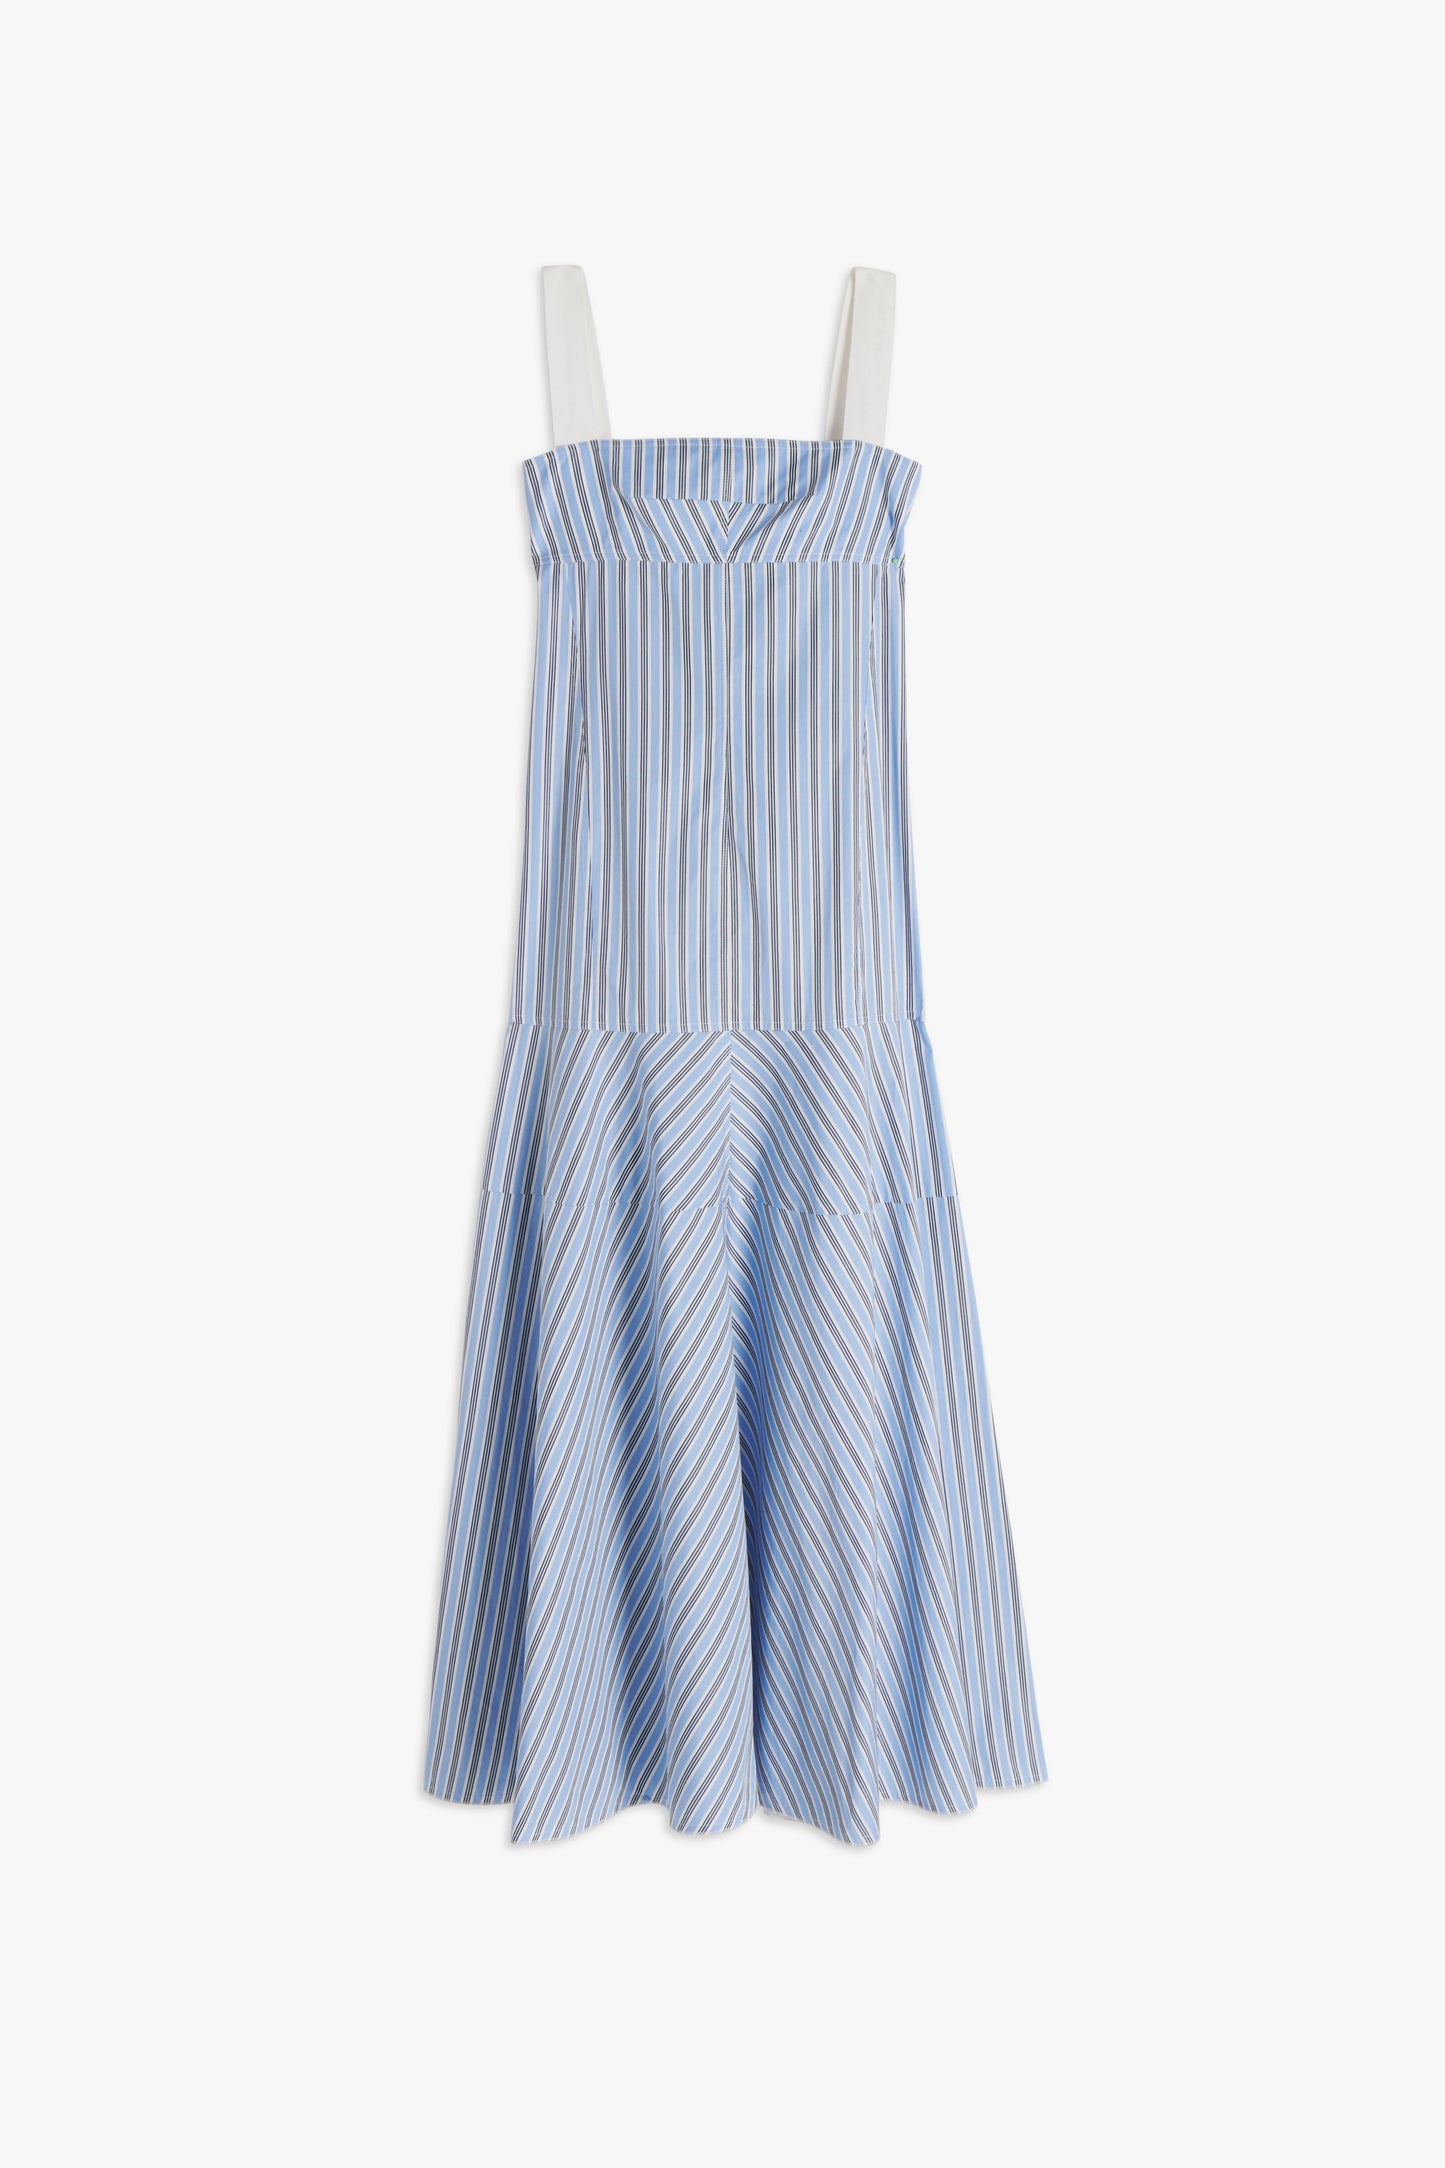 Panelled Maxi Dress in Oxford Blue Stripe